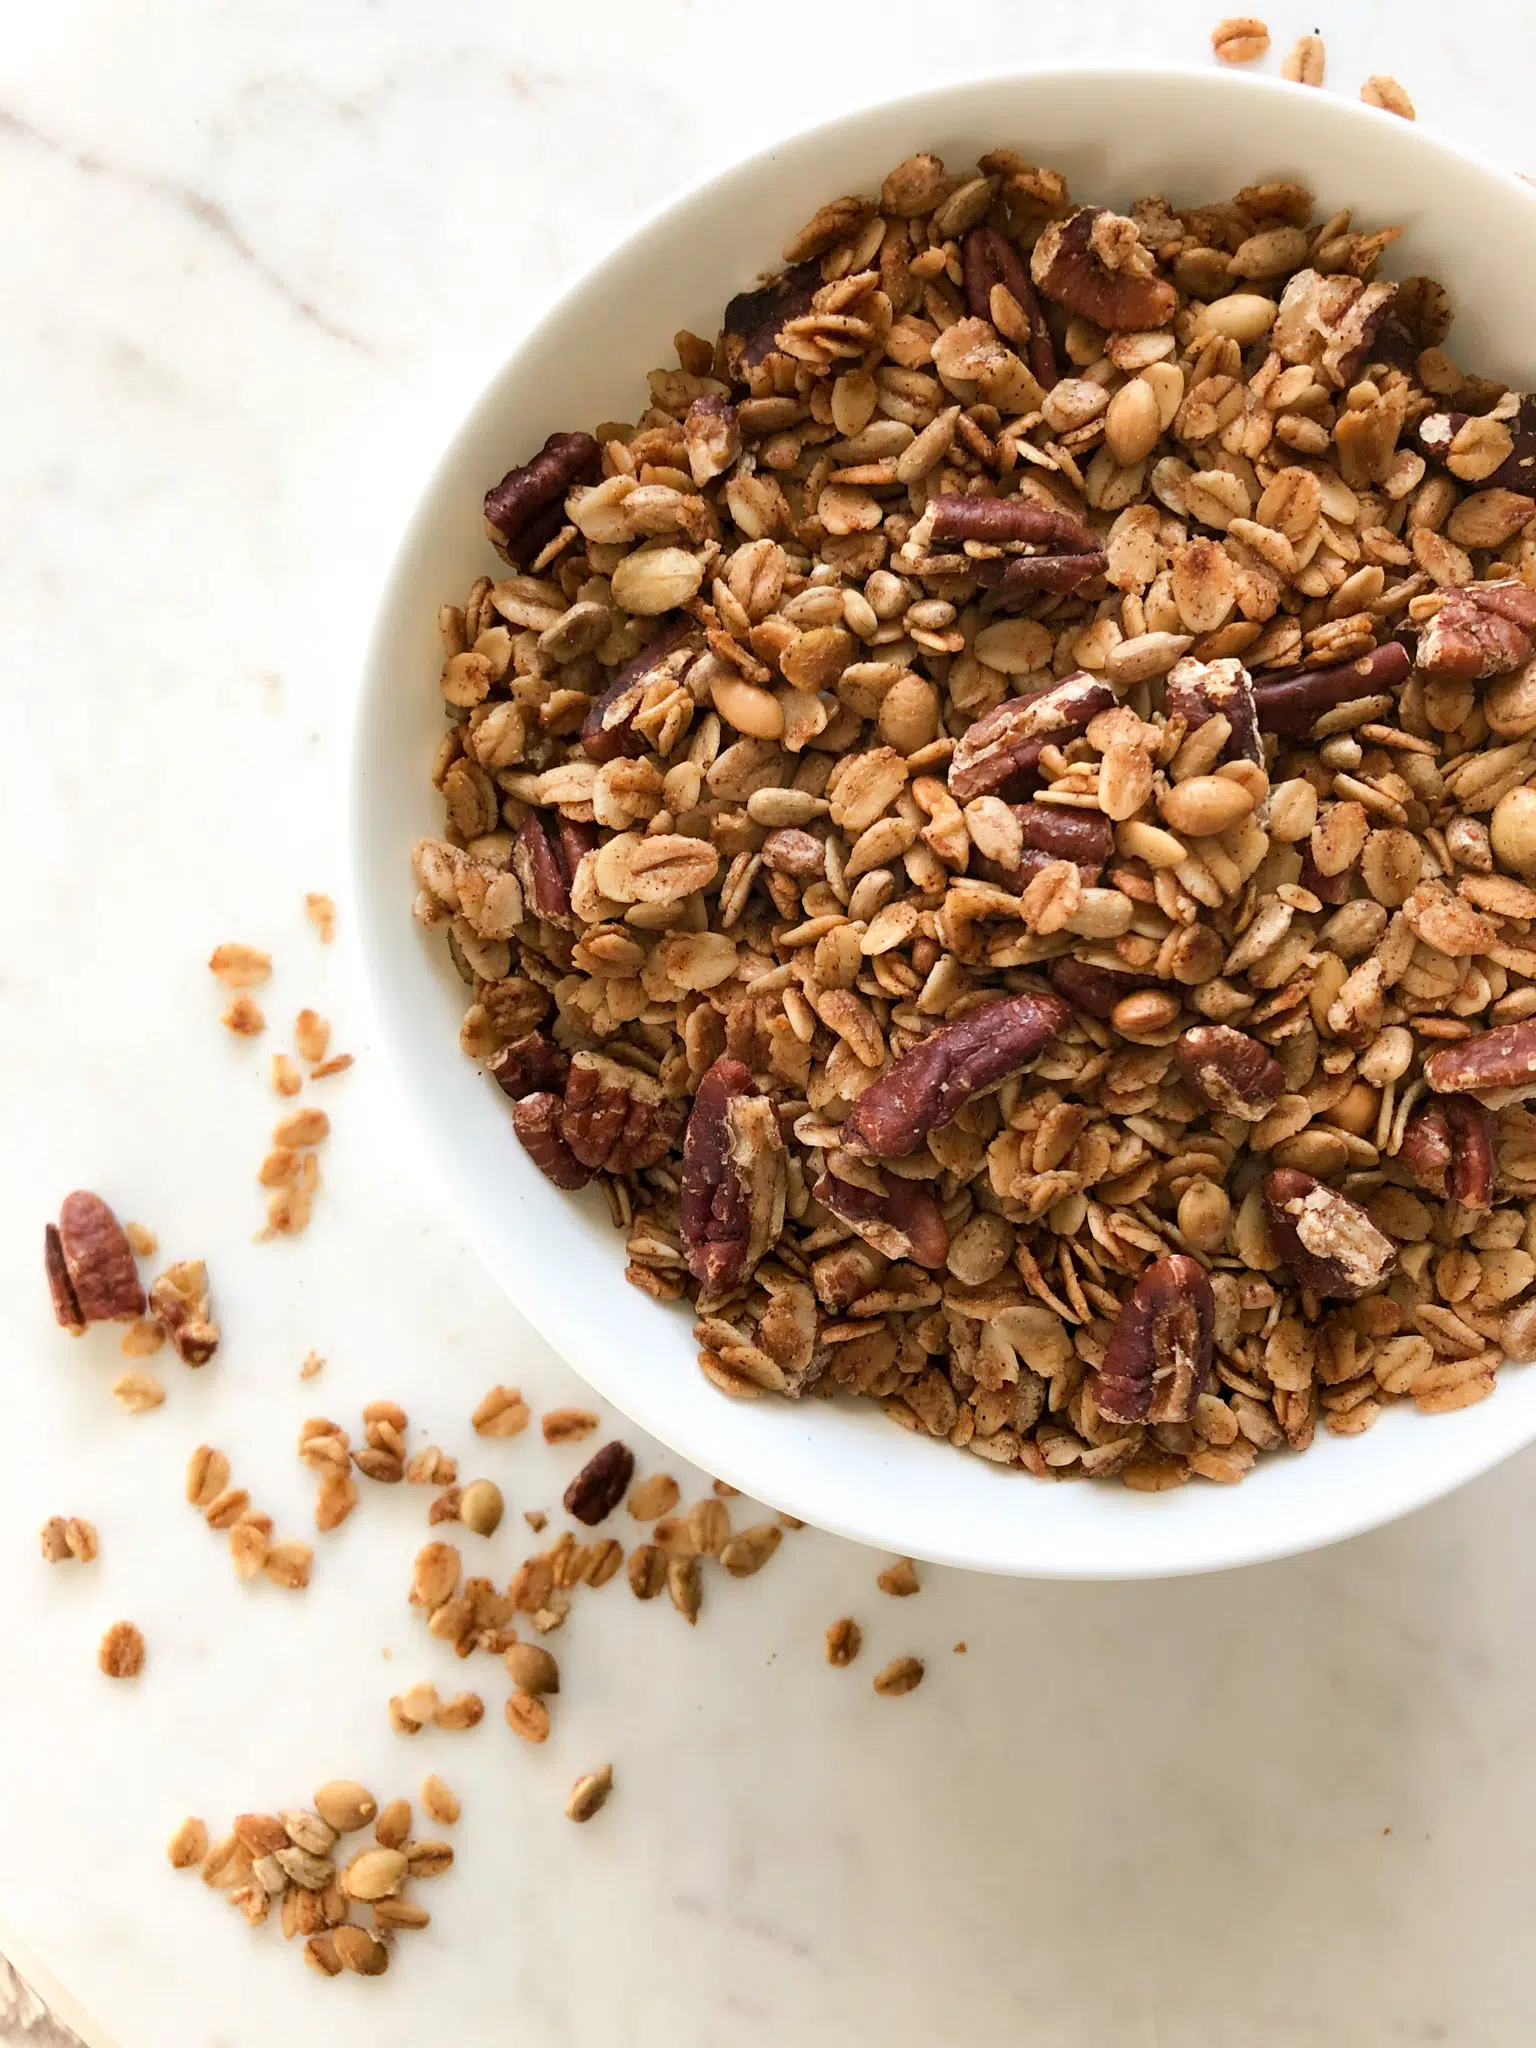 Healthy Hemp Granola | by Healthy With a Chance of Sprinkles